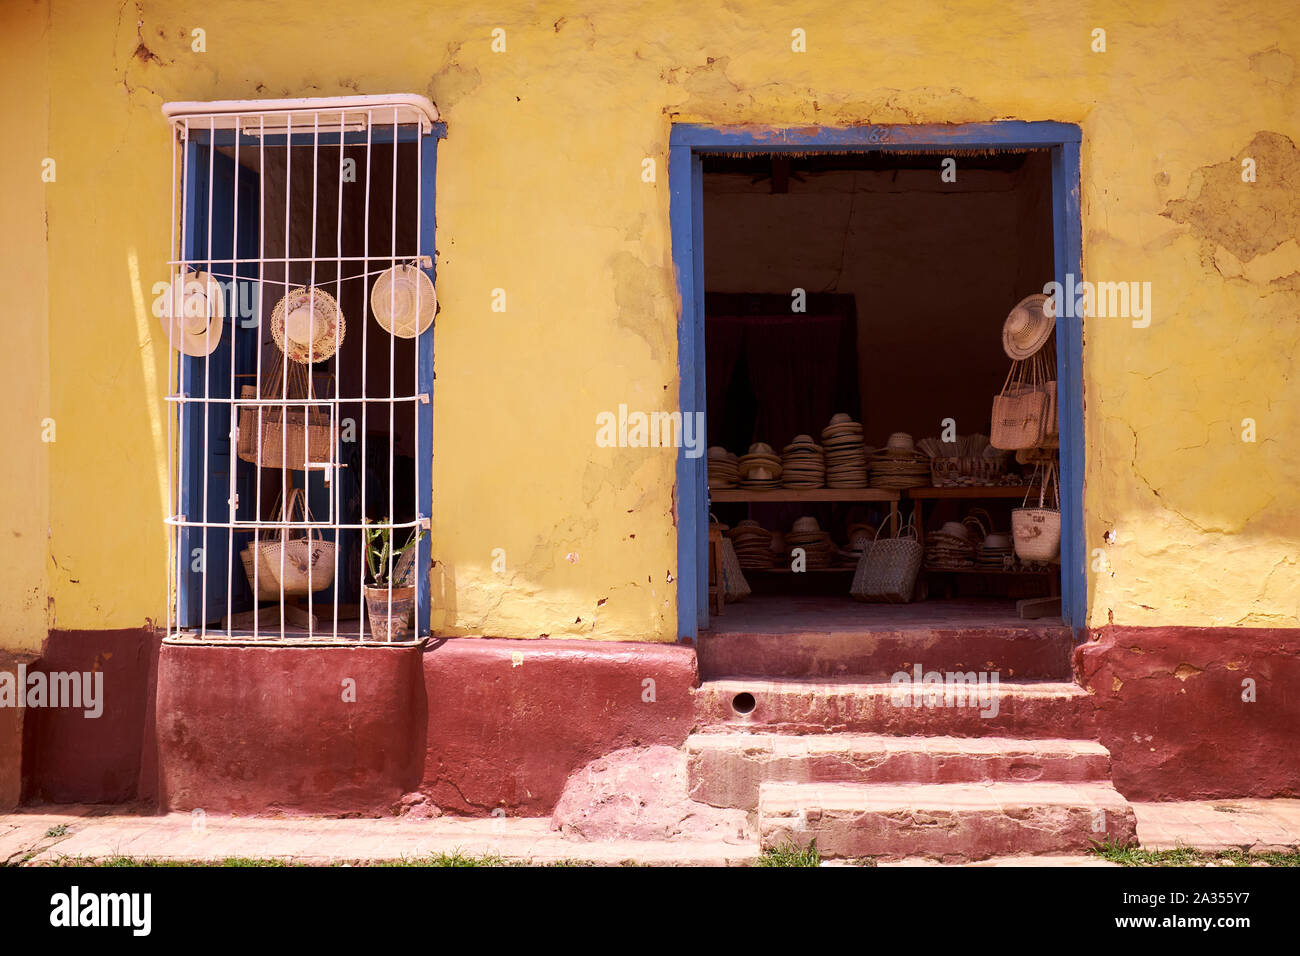 A shop selling straw hats in Trinidad, Cuba Stock Photo